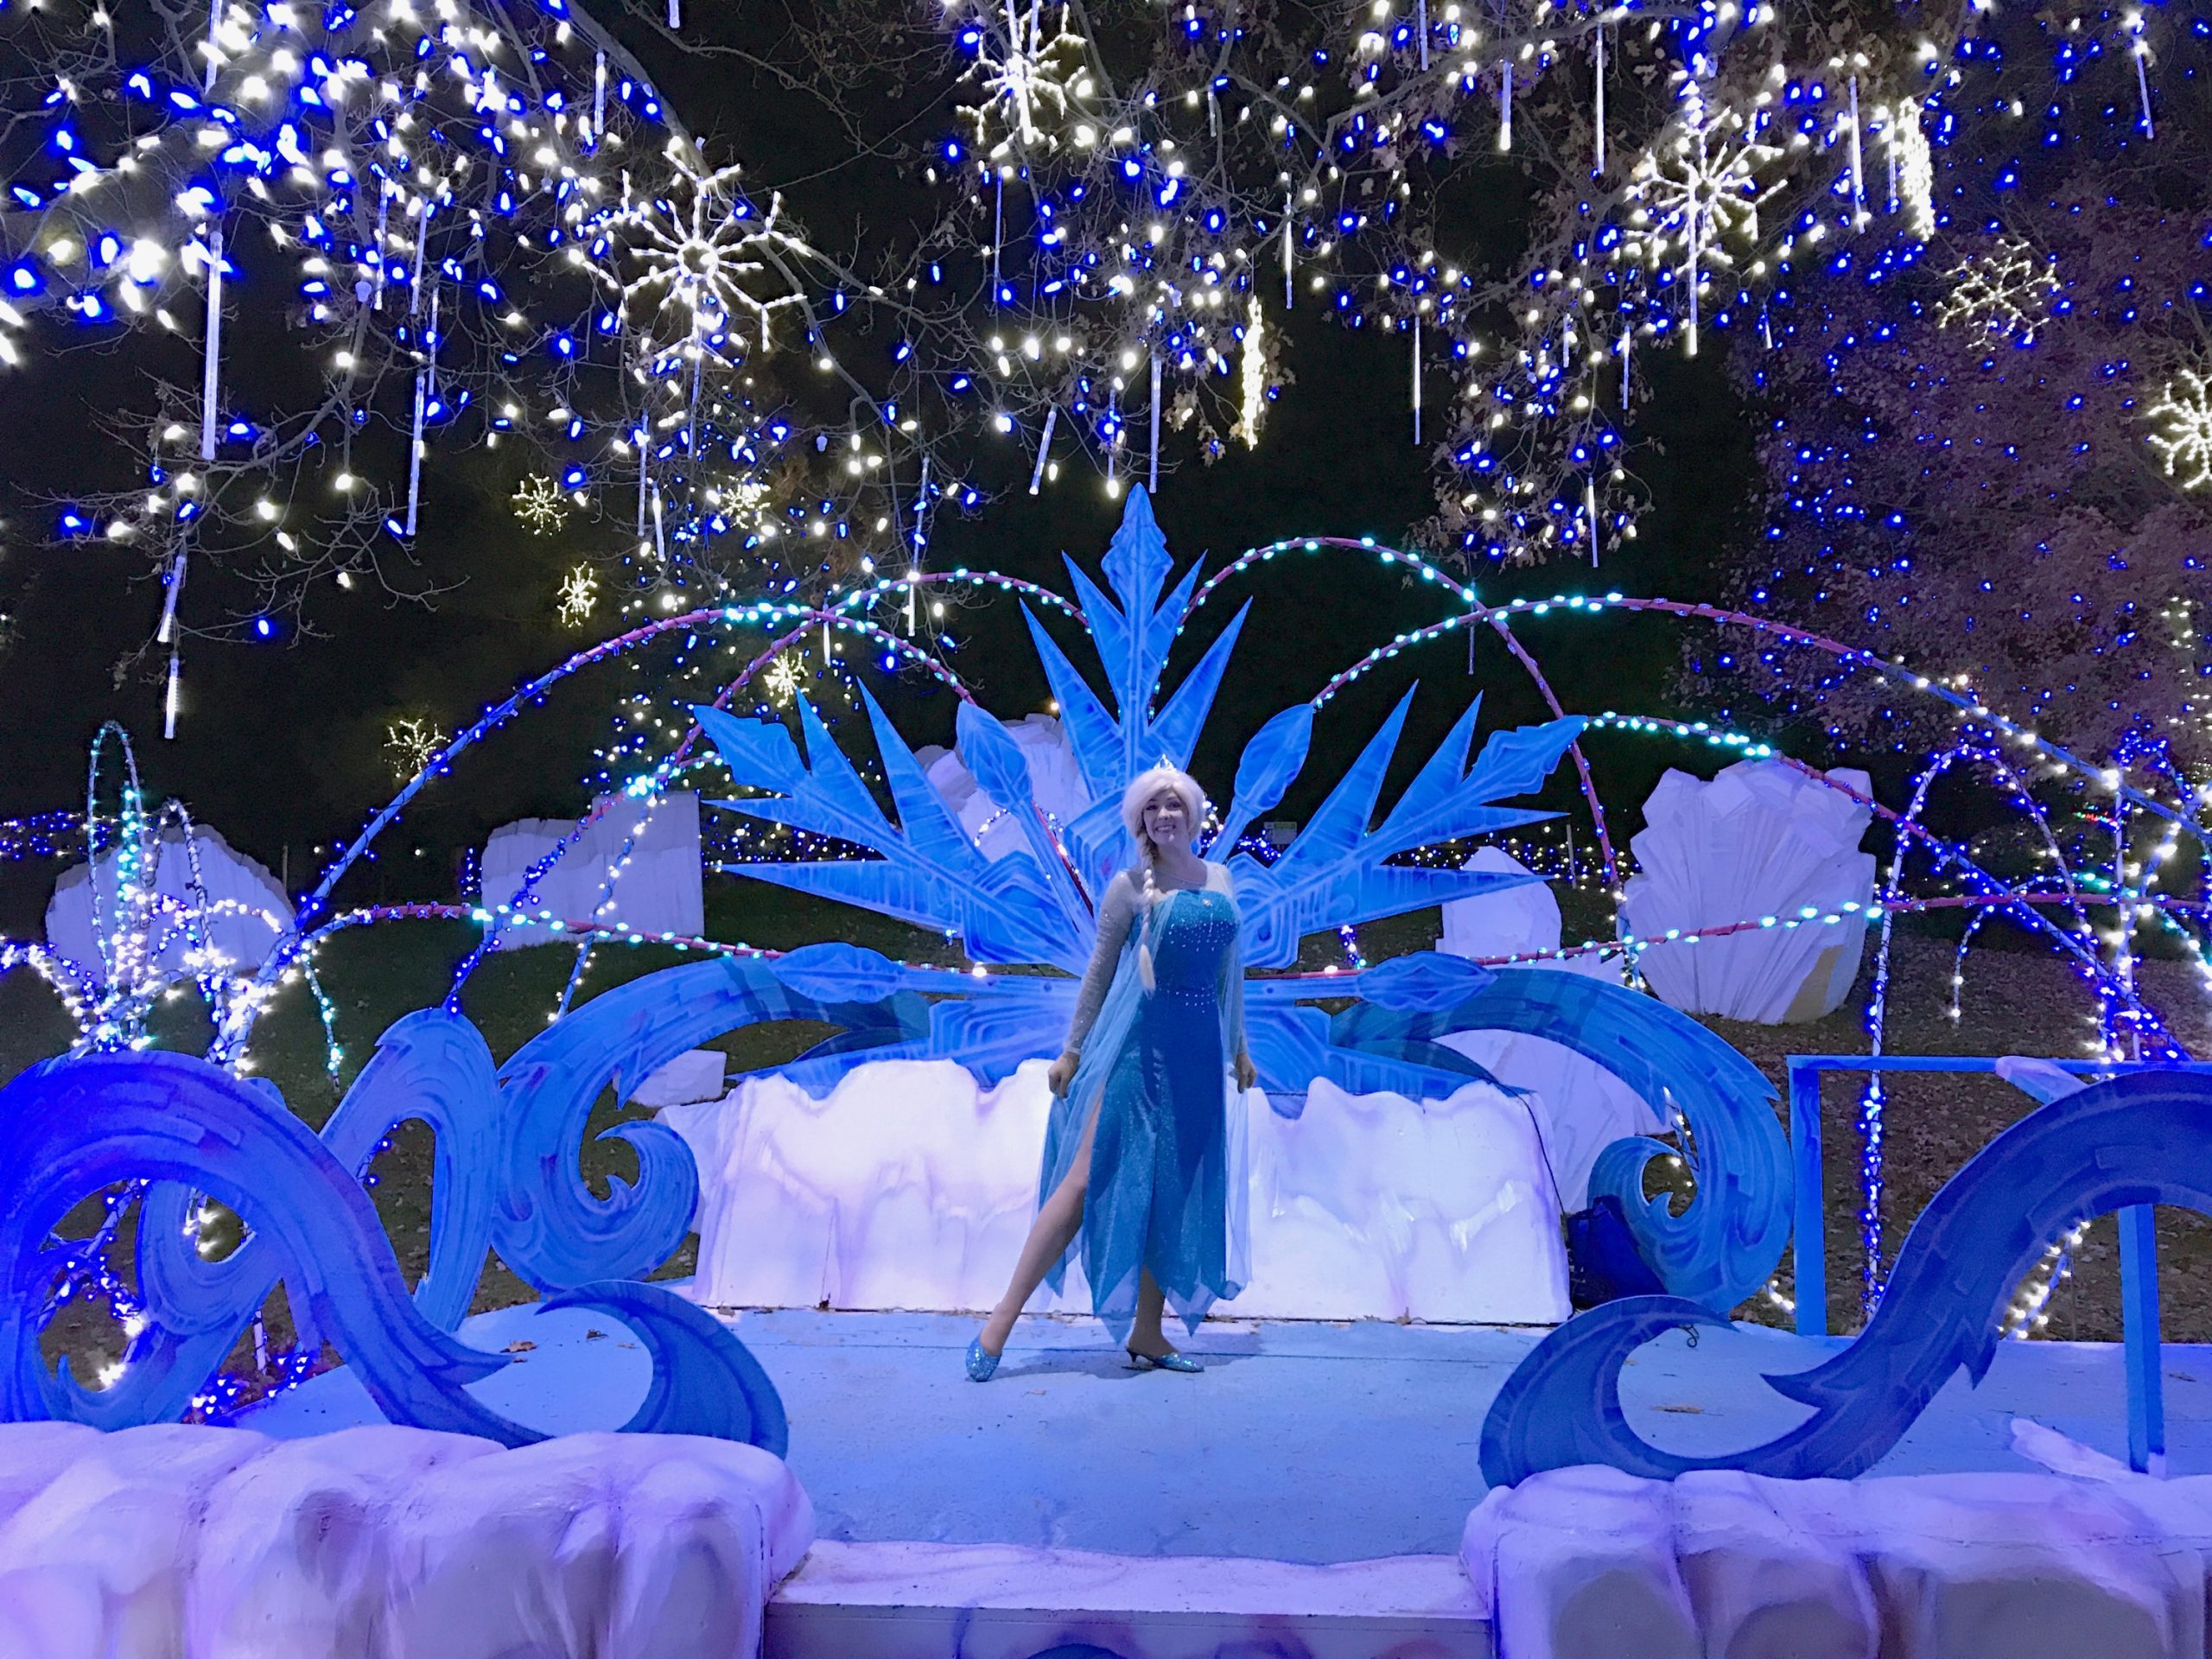 Elsa on the princess performance stage, adorned with ice motifs and blue holiday lights